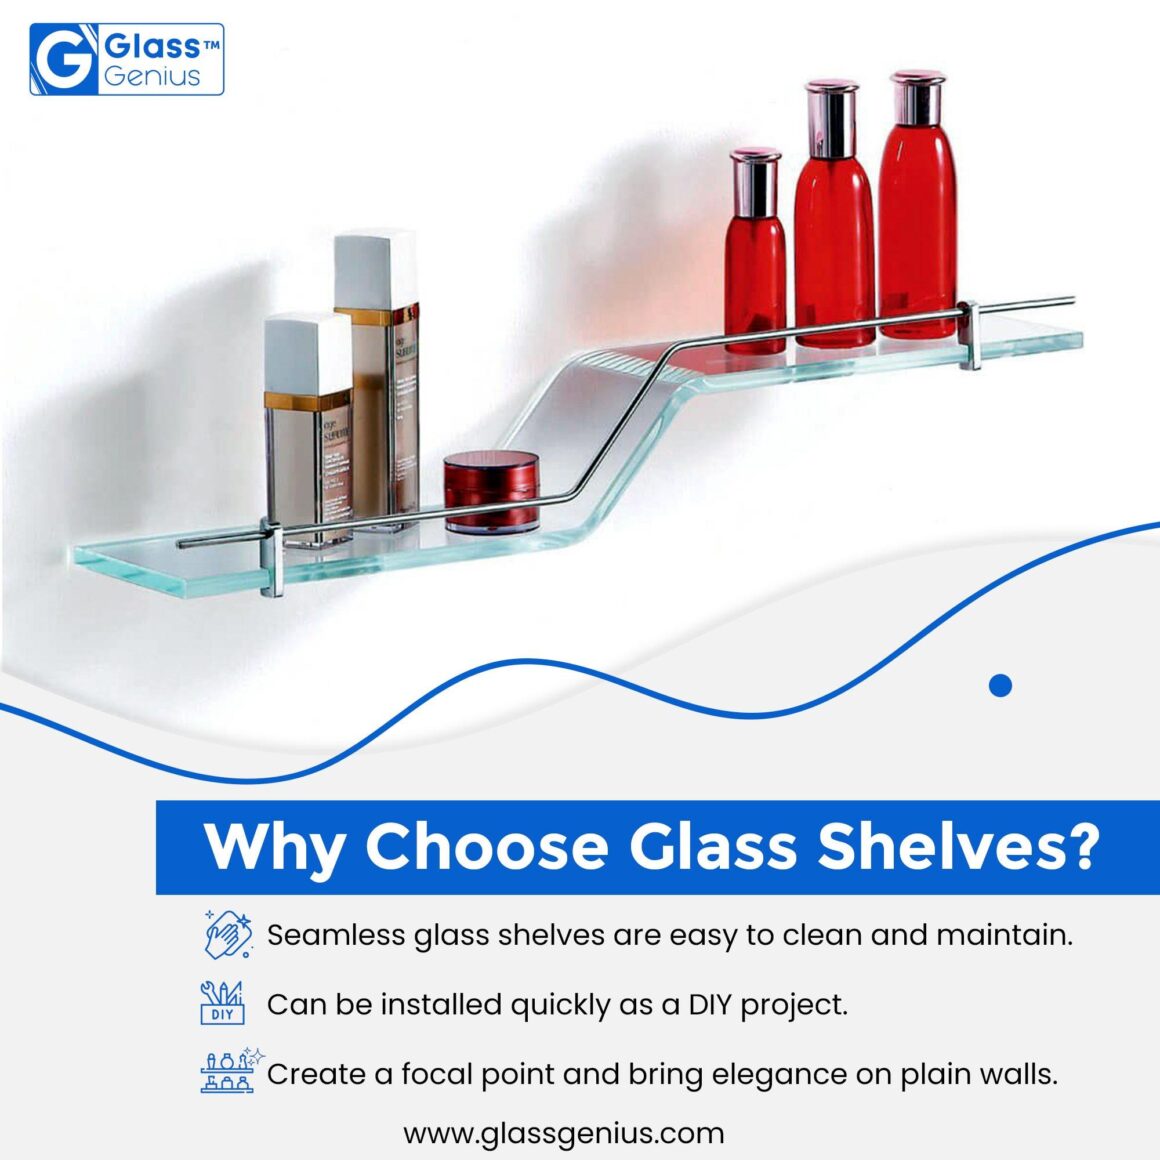 Ease and Comforts that Glass Shelves Offer